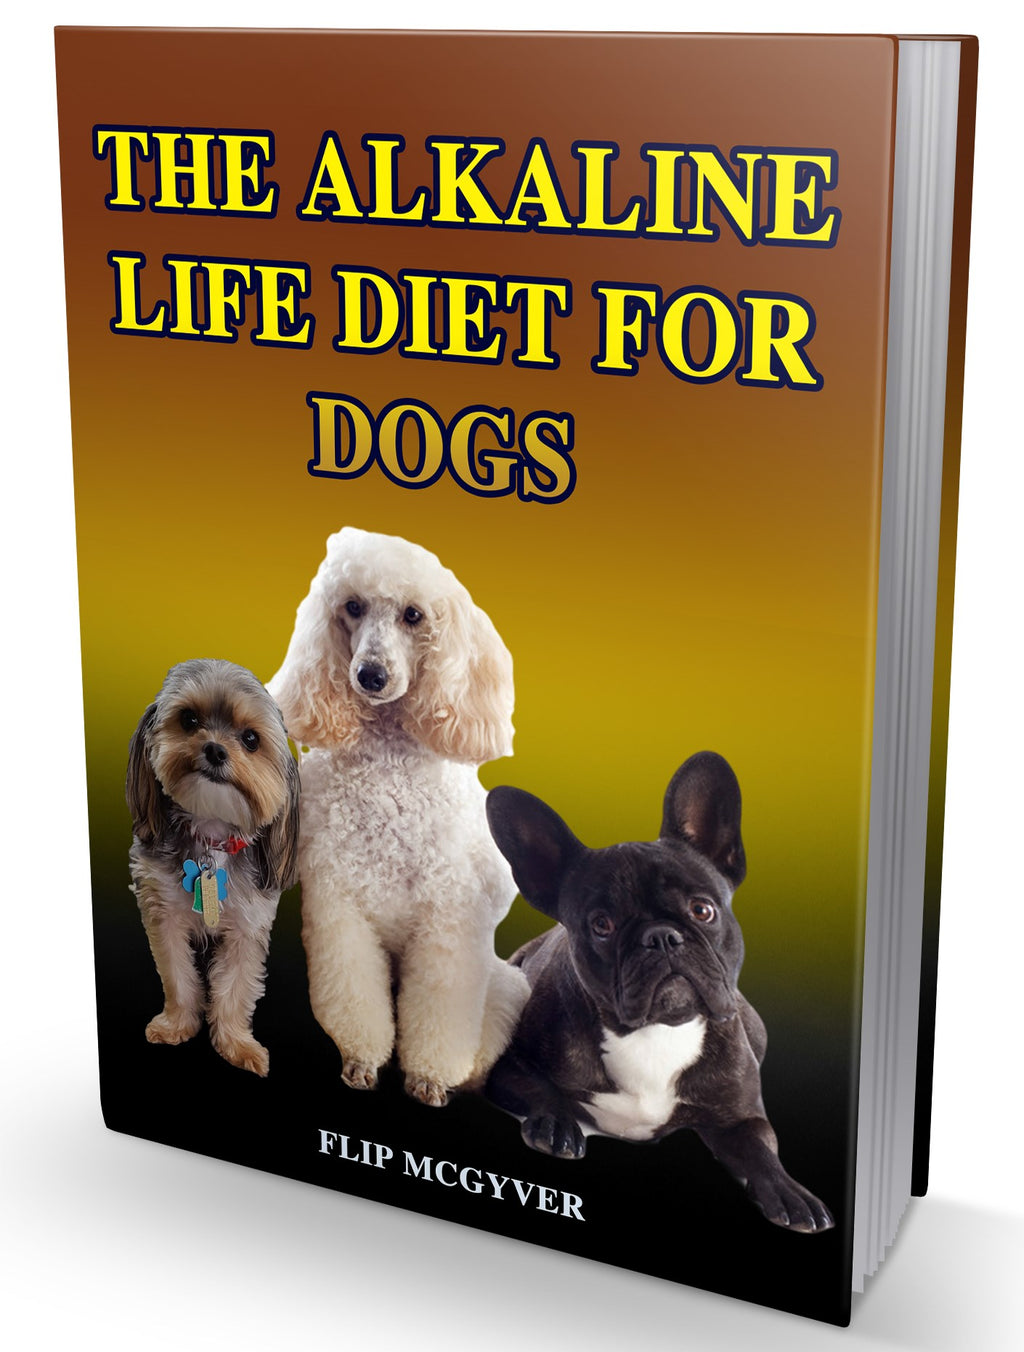 THE ALKALINE LIFE DIET FOR DOGS